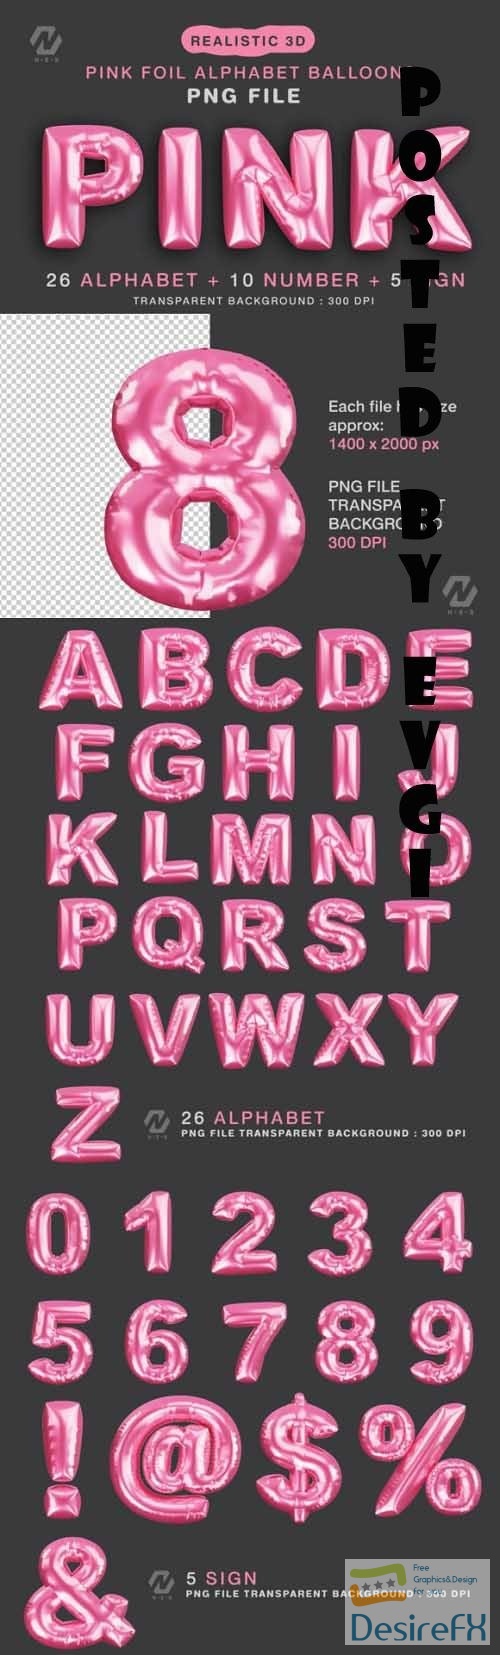 Pink Foil Alphabet Balloon Realistic PNG